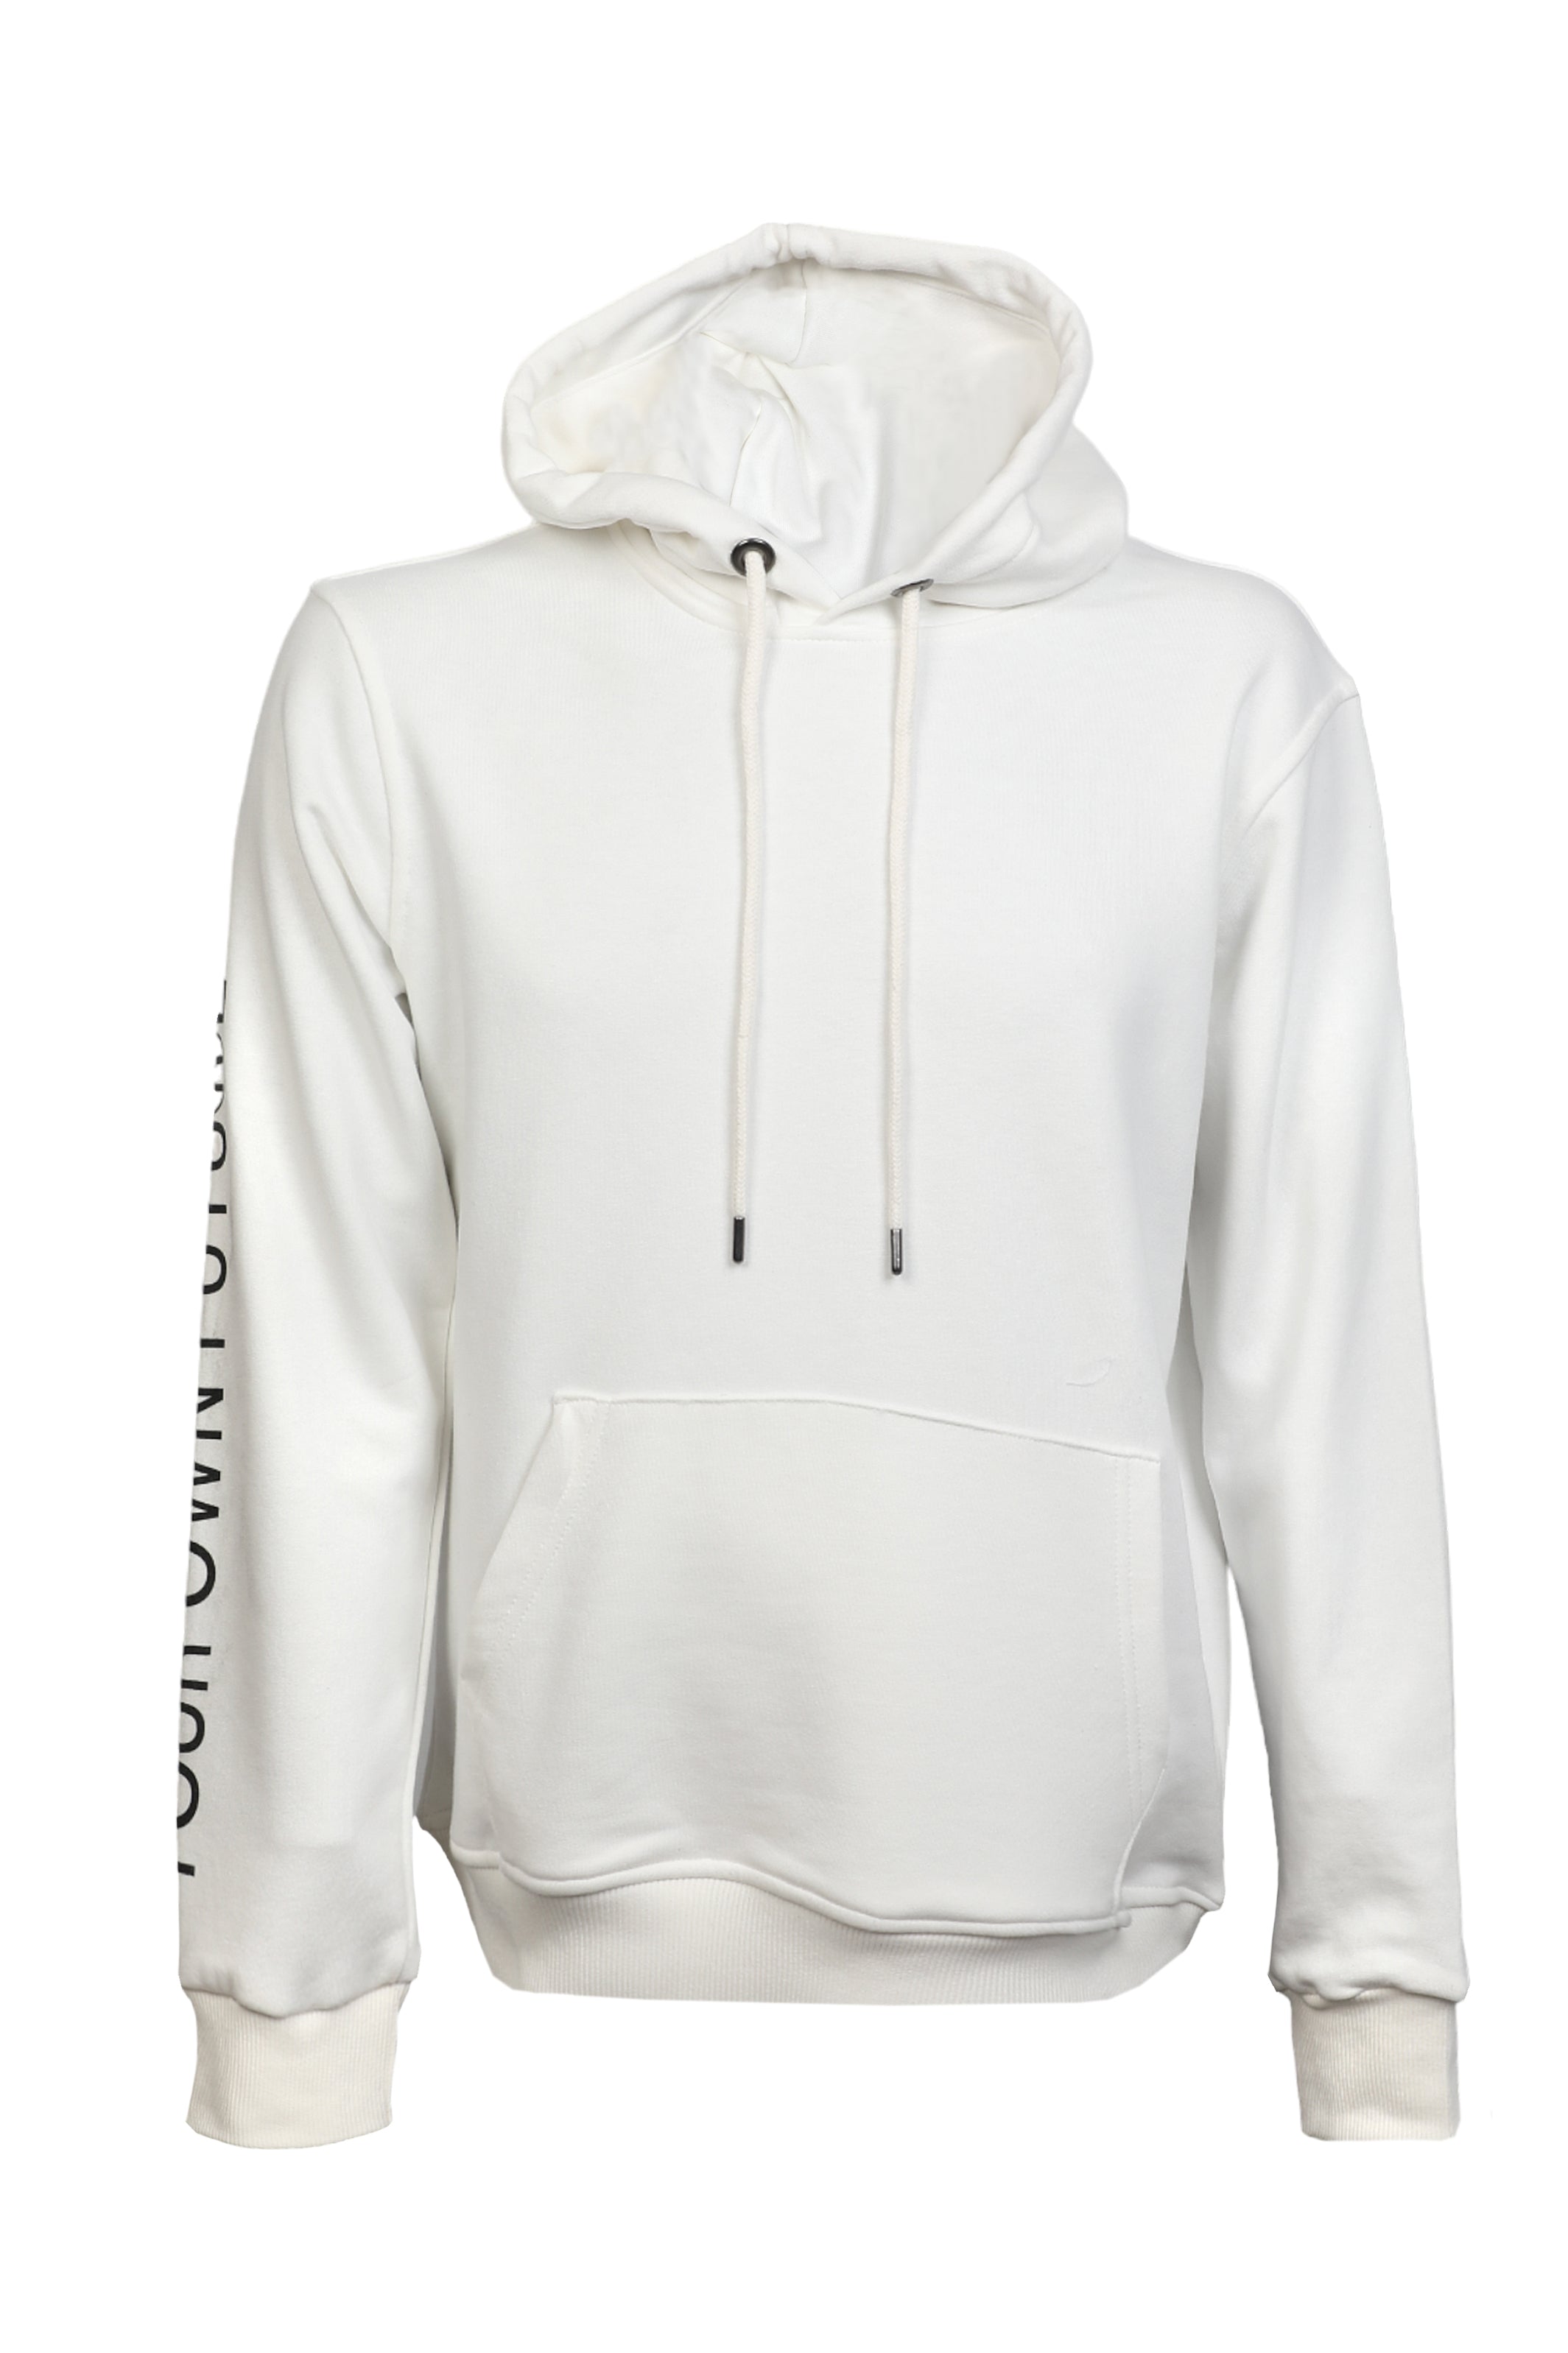 Men "Your Own Future" Designed White Hoodie